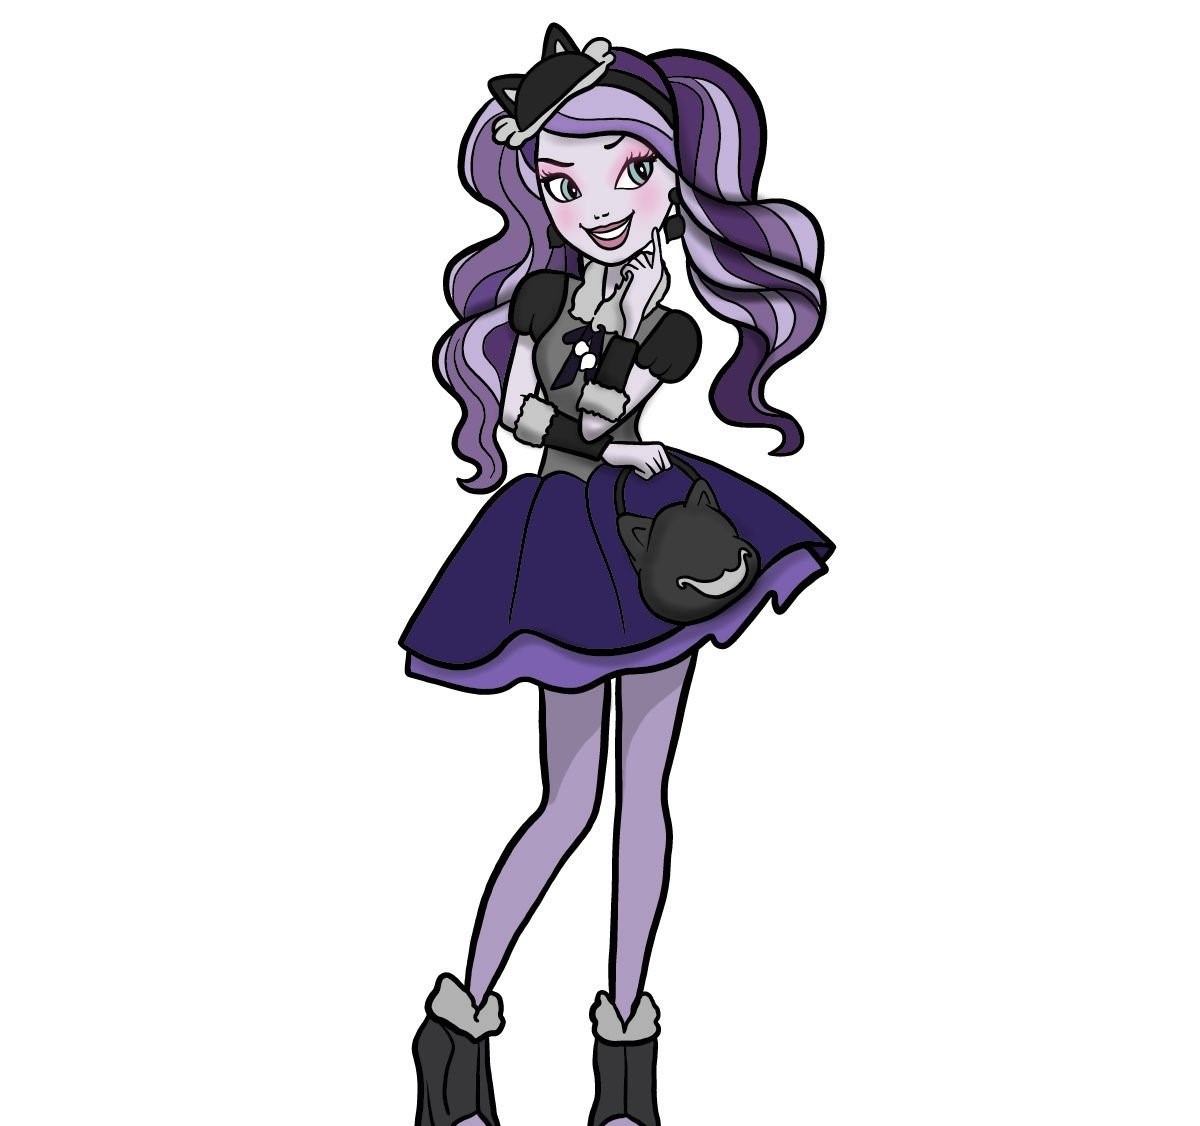 20 Facts About Kitty Cheshire (Ever After High) - Facts.net